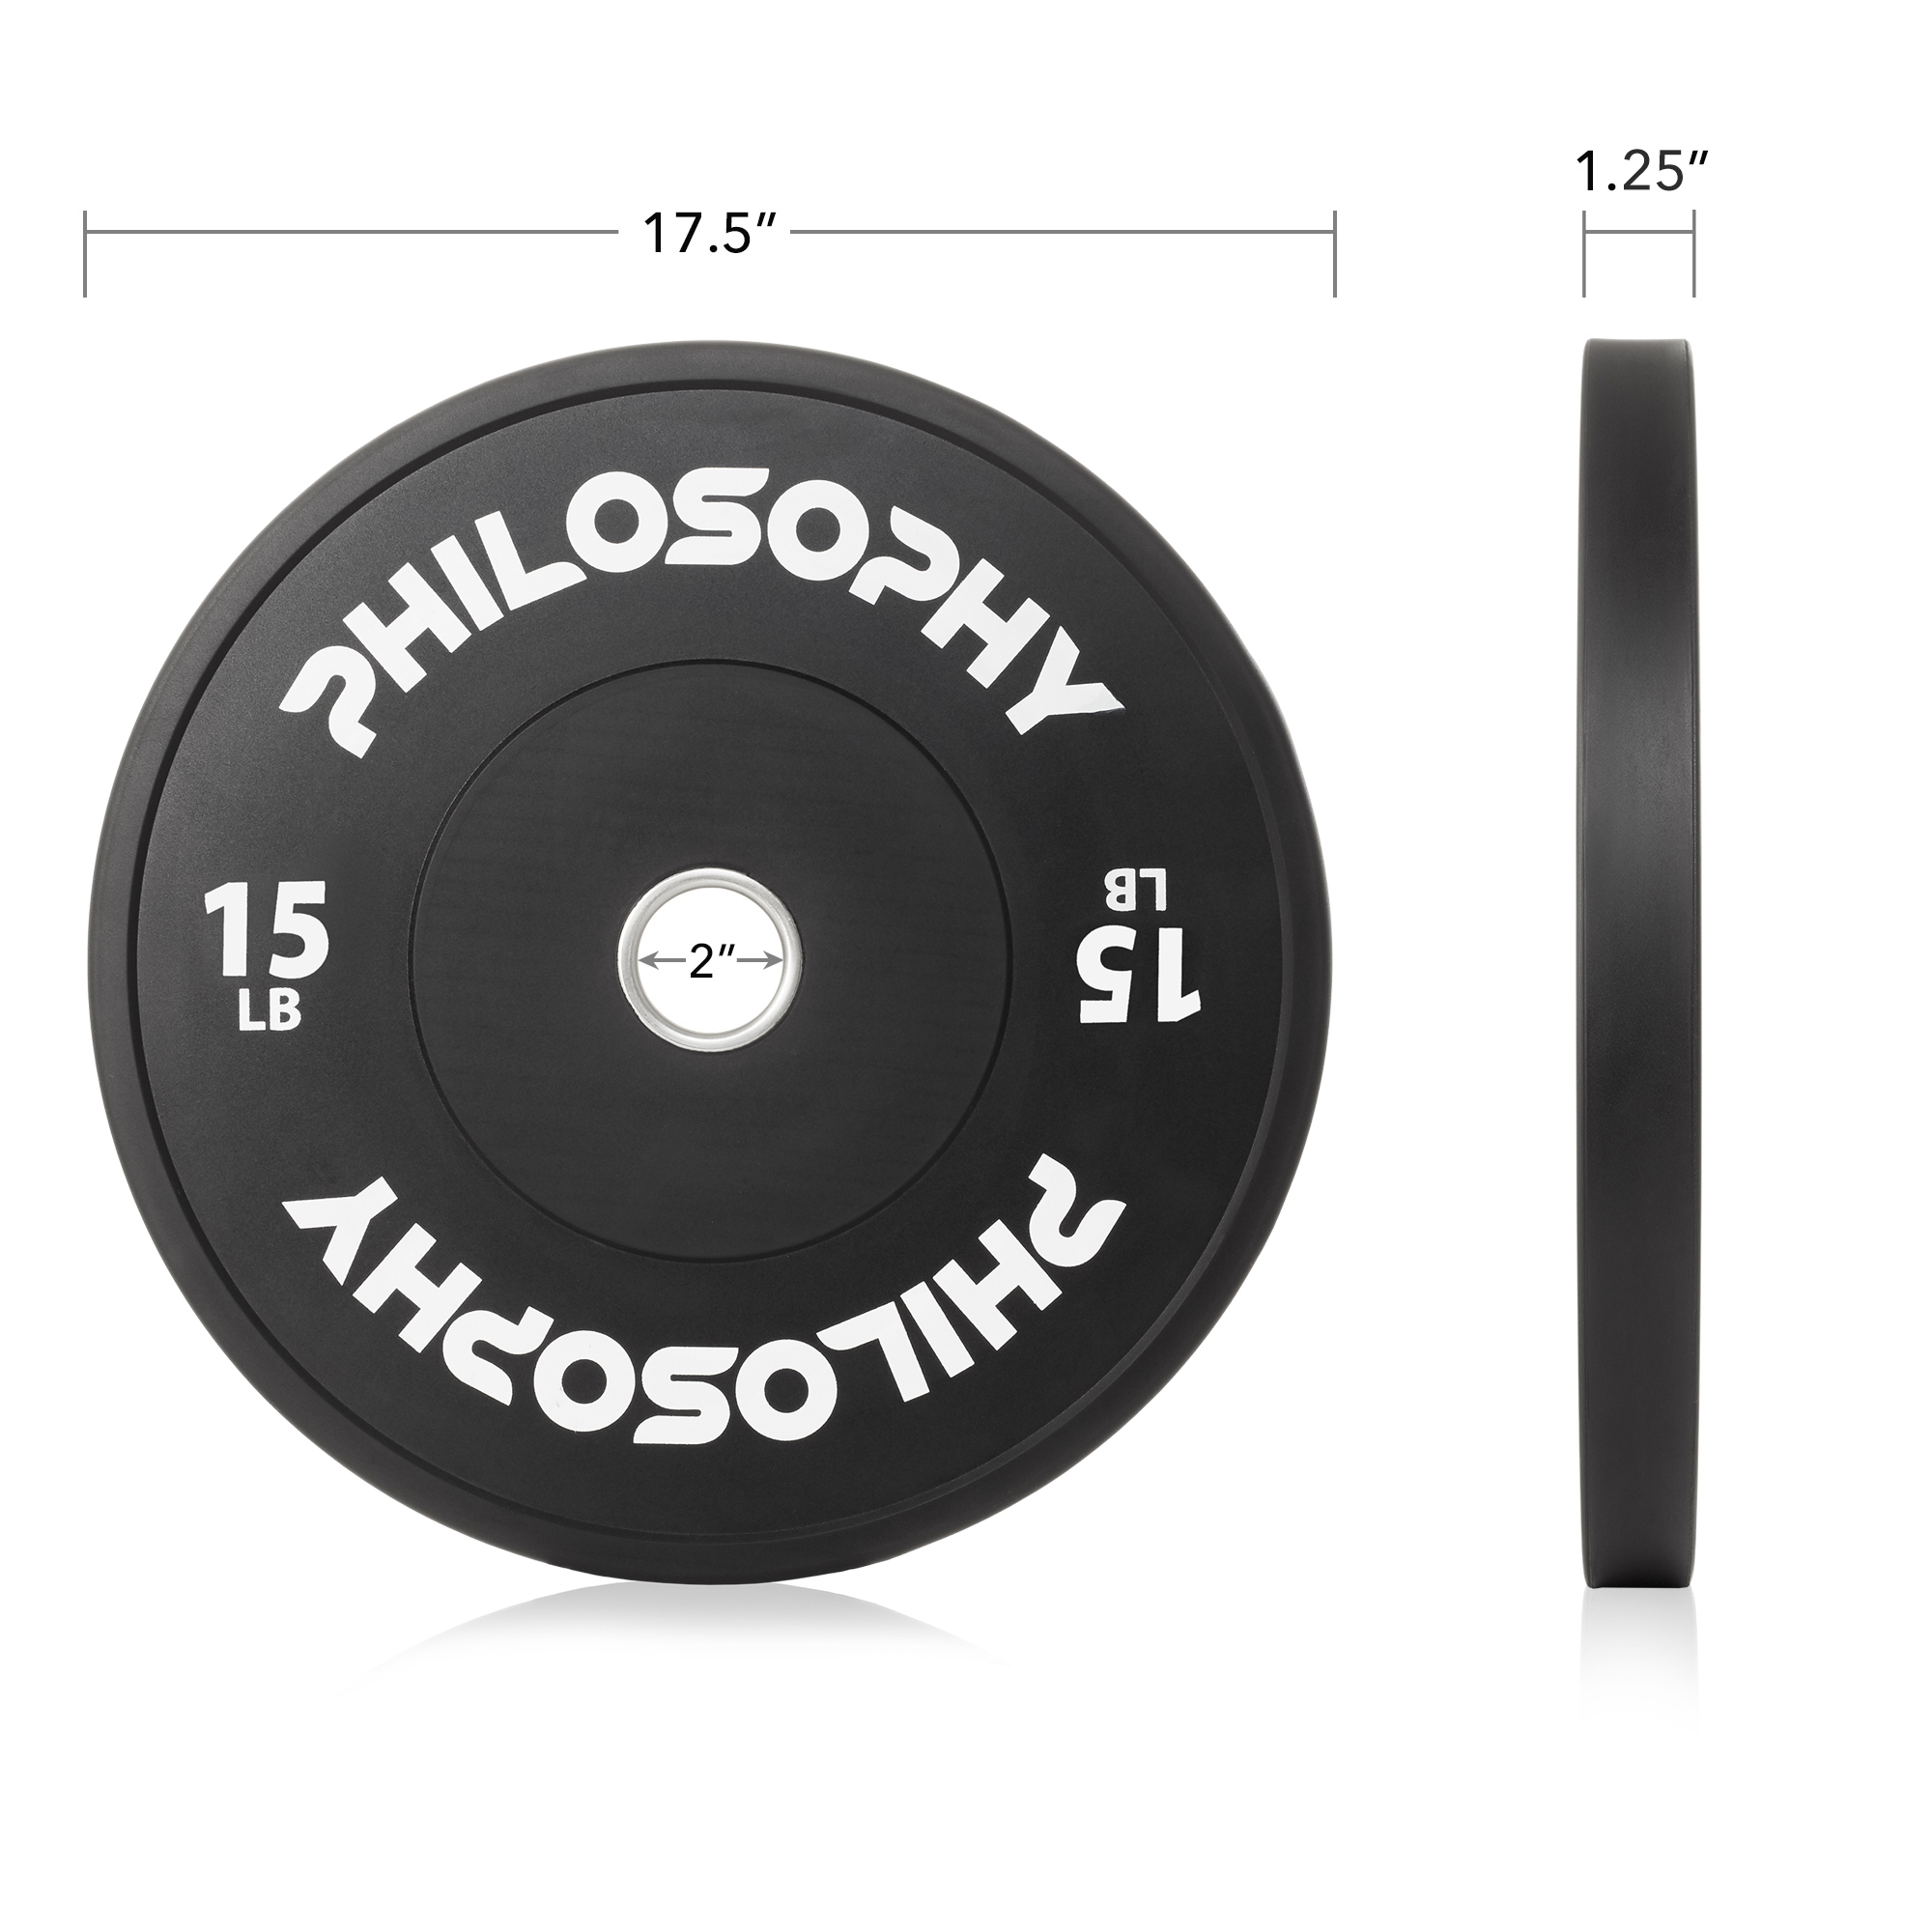 Philosophy Gym Set of 2 Olympic 2-Inch Rubber Bumper Plates (15 LB each) Black